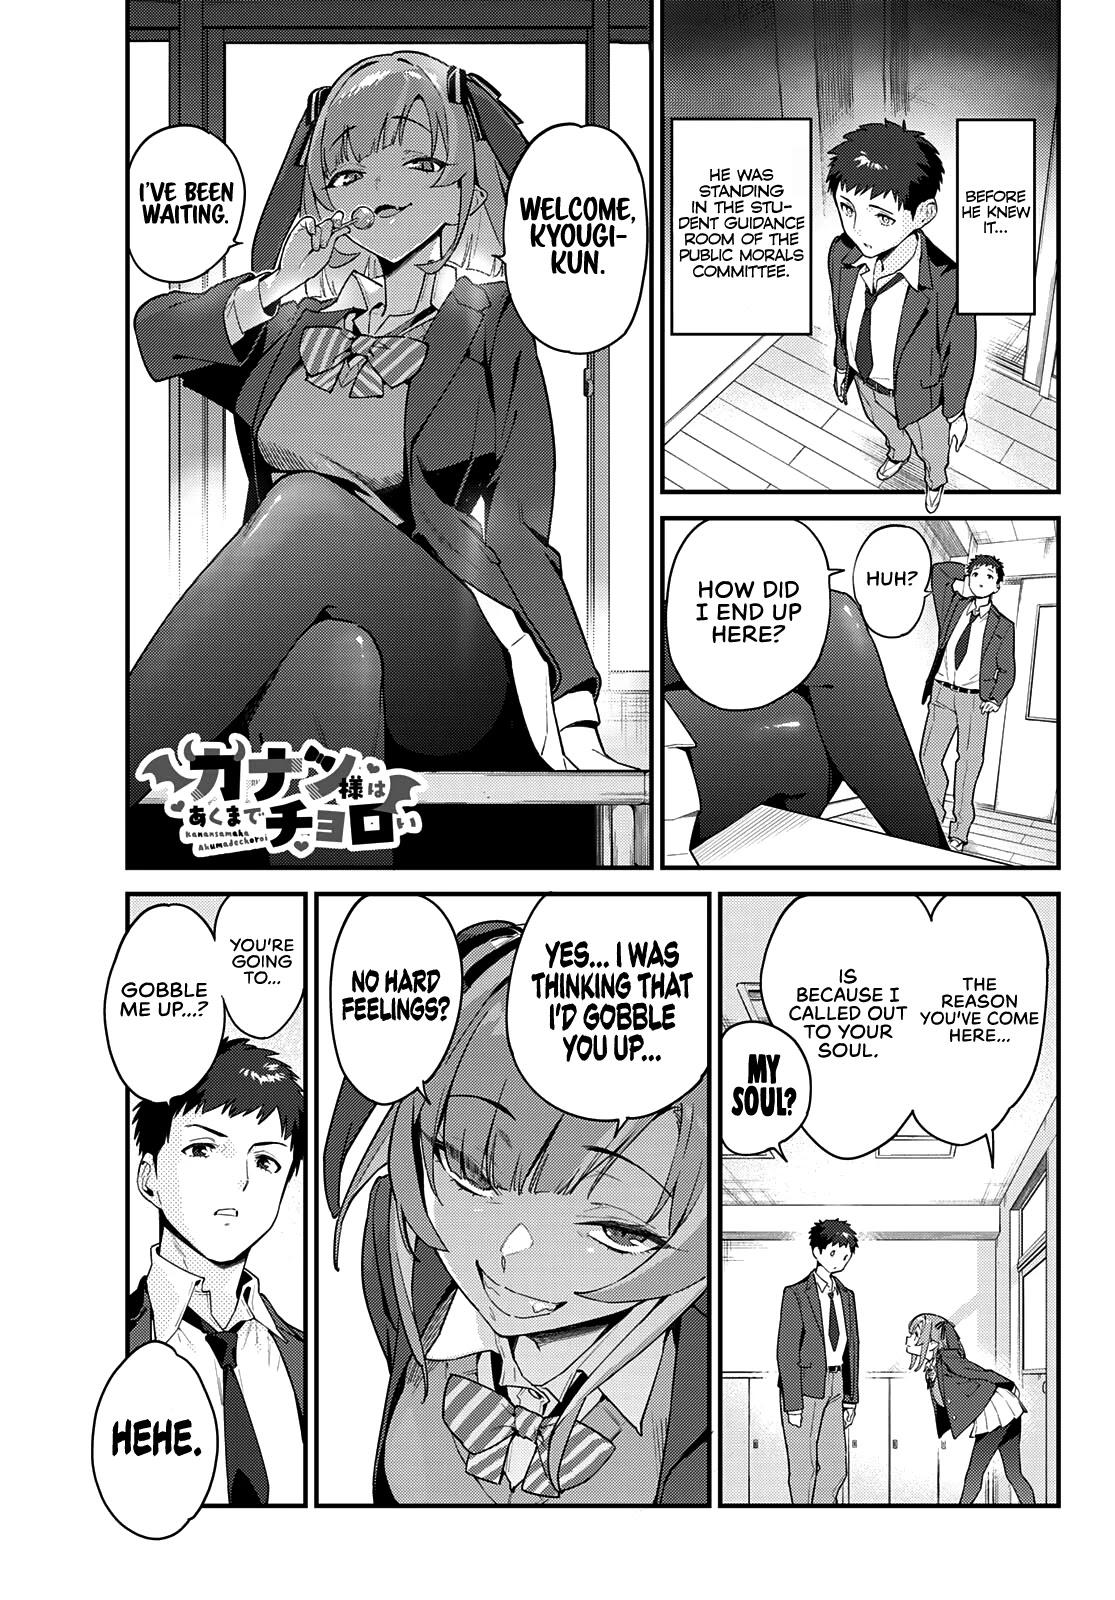 Kanan-sama is easy as hell chapter 1